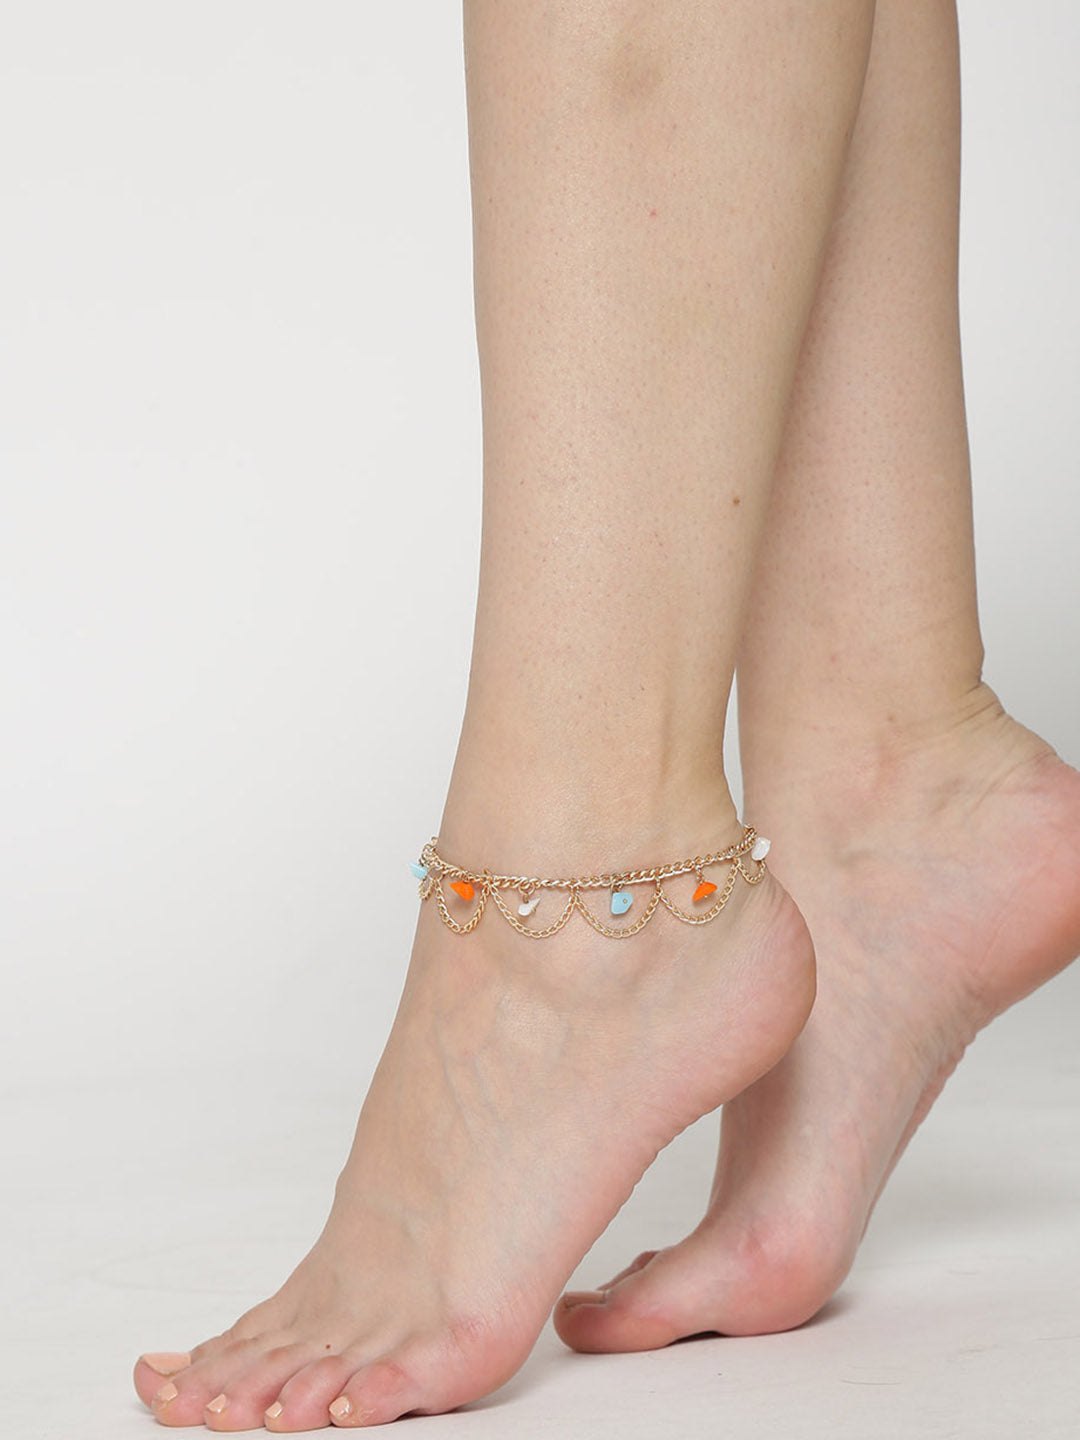 Gold toned beaded anklets